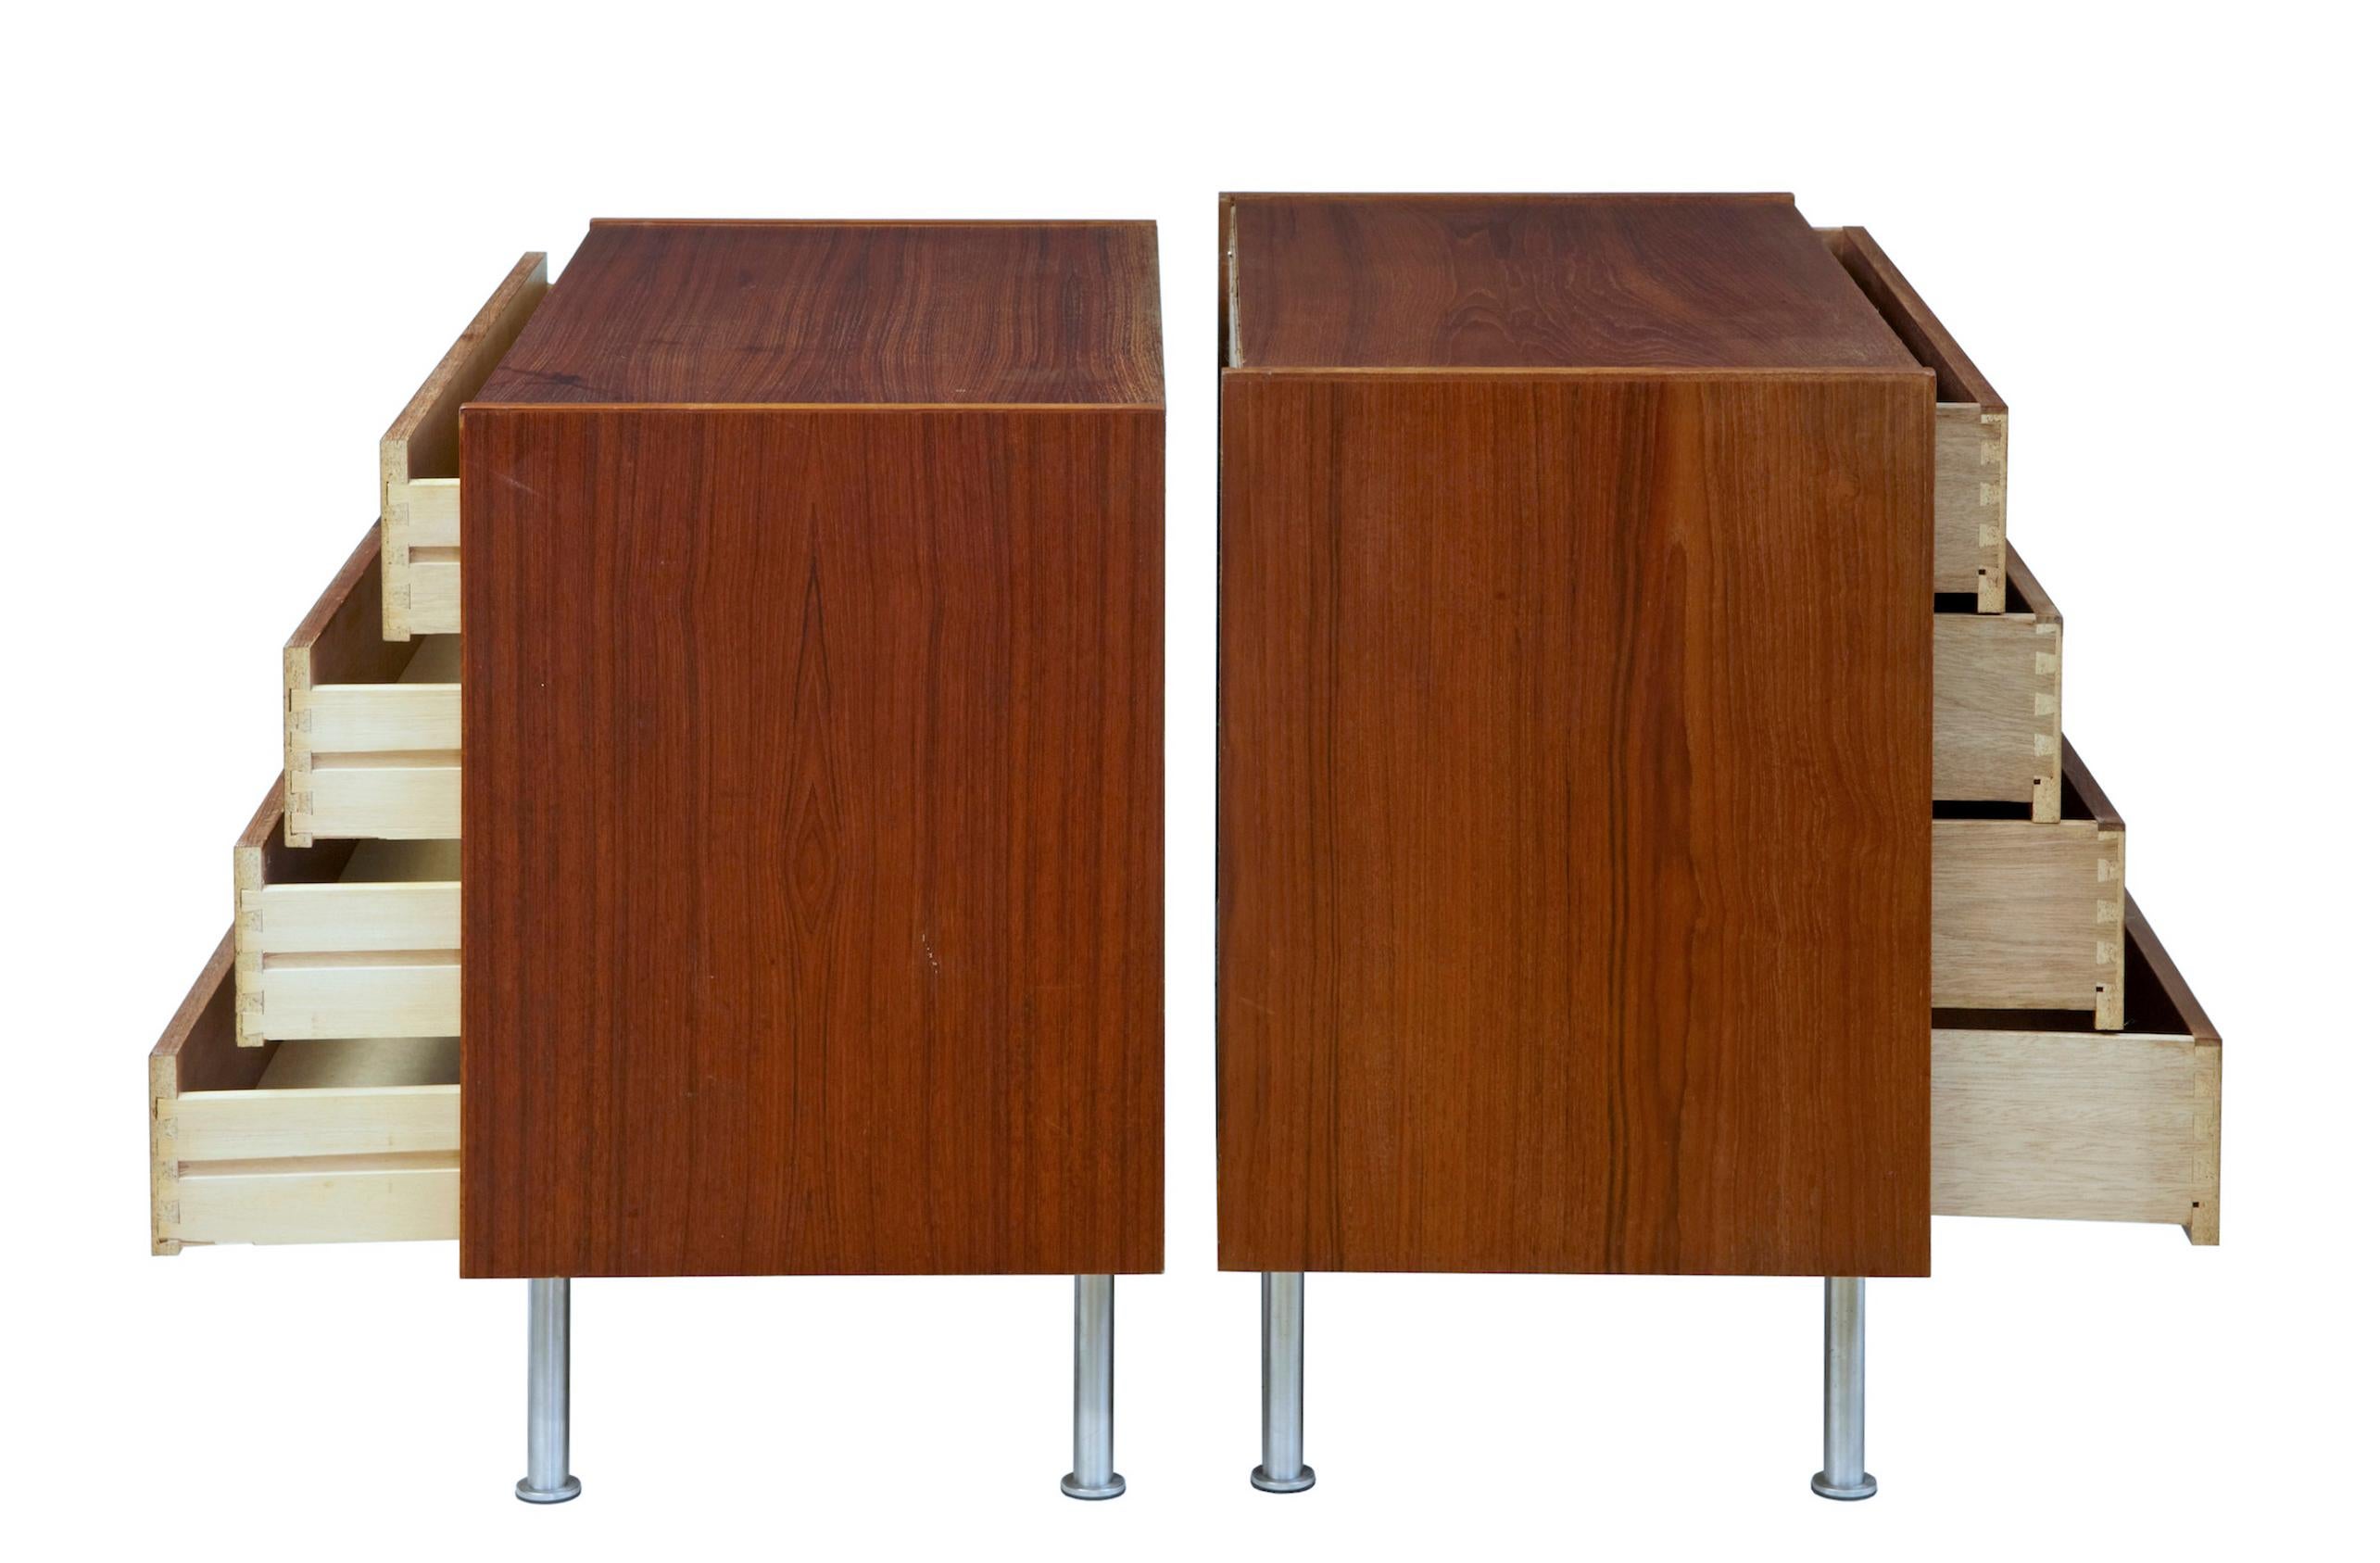 Near pair of danish 1970s teak chest of drawers.

Near pair with slightly differing heights and depths. Each with 4 drawers and recessed solid wood handles. Standing on 4 tubular steel legs. Some marking and staining to most surfaces, making these